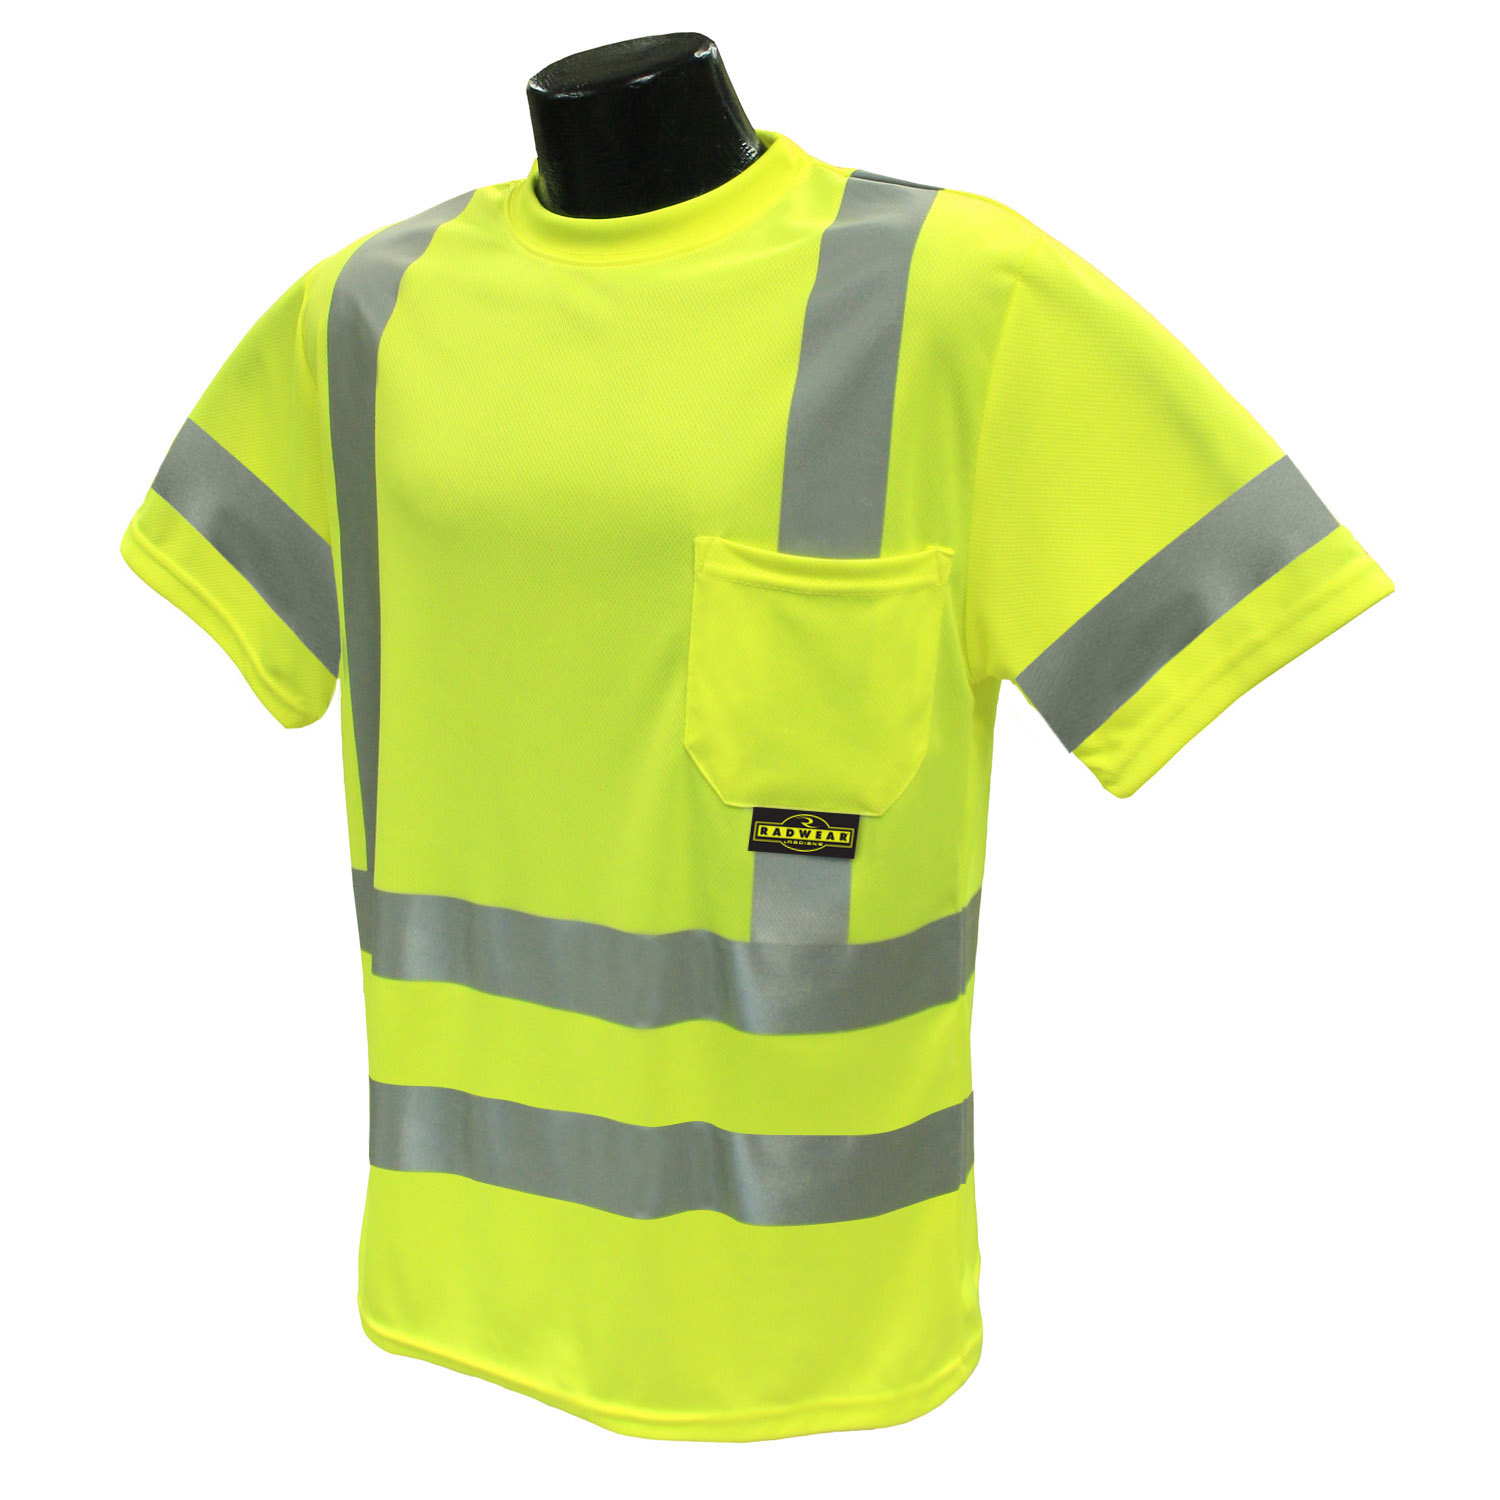 S, Neon Green - style 8 High Visibility Reflective Safety T-Shirts Customize Logo Hi Vis Long Sleeve Protective Shirts with Reflective Strips